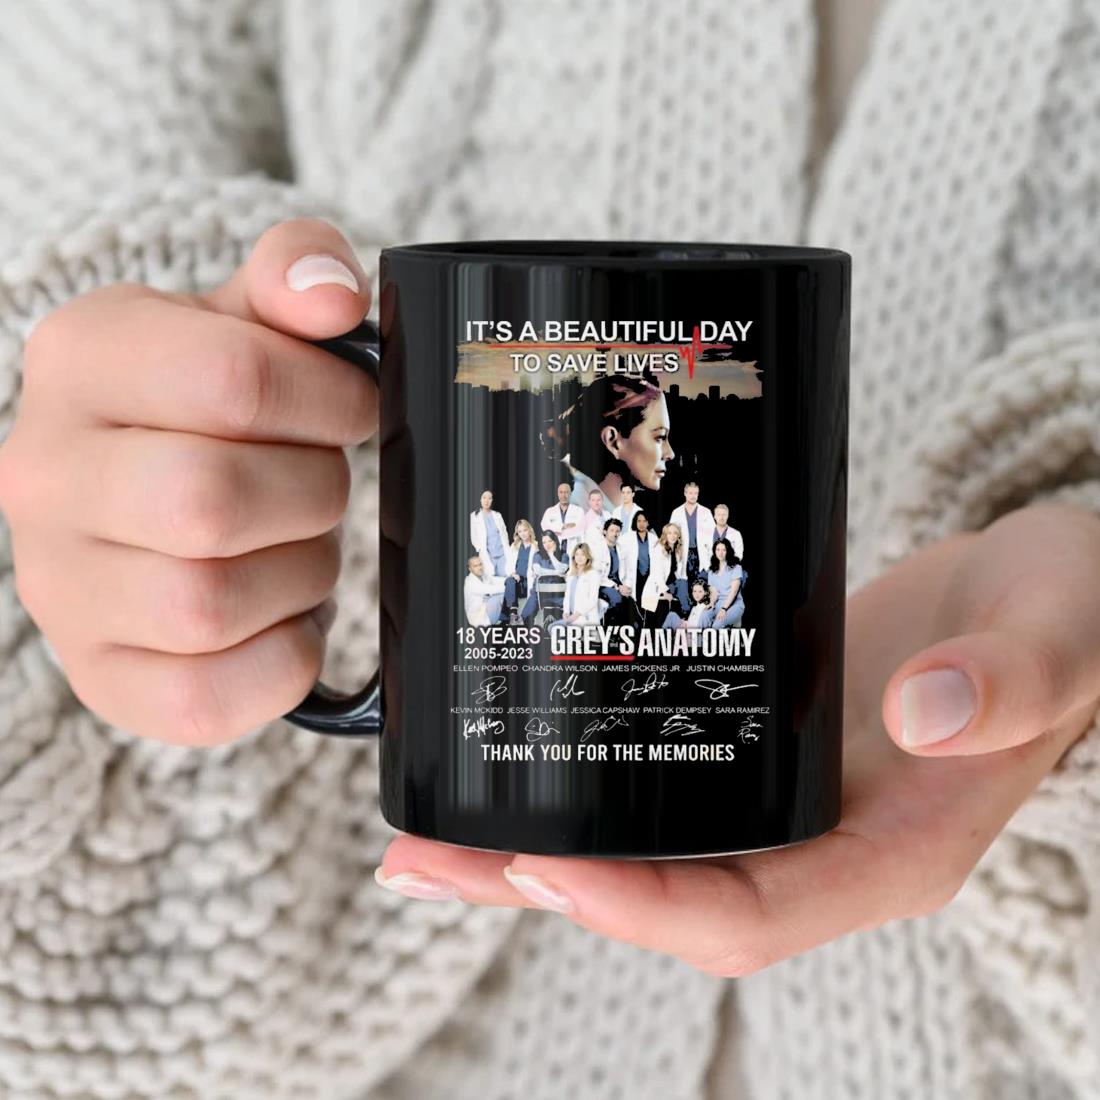 It’s A Beautiful Day To Save Lives 18 Years Of 2005 – 2023 Grey’s Anatomy Thank You For The Memories Signatures Mug nhu